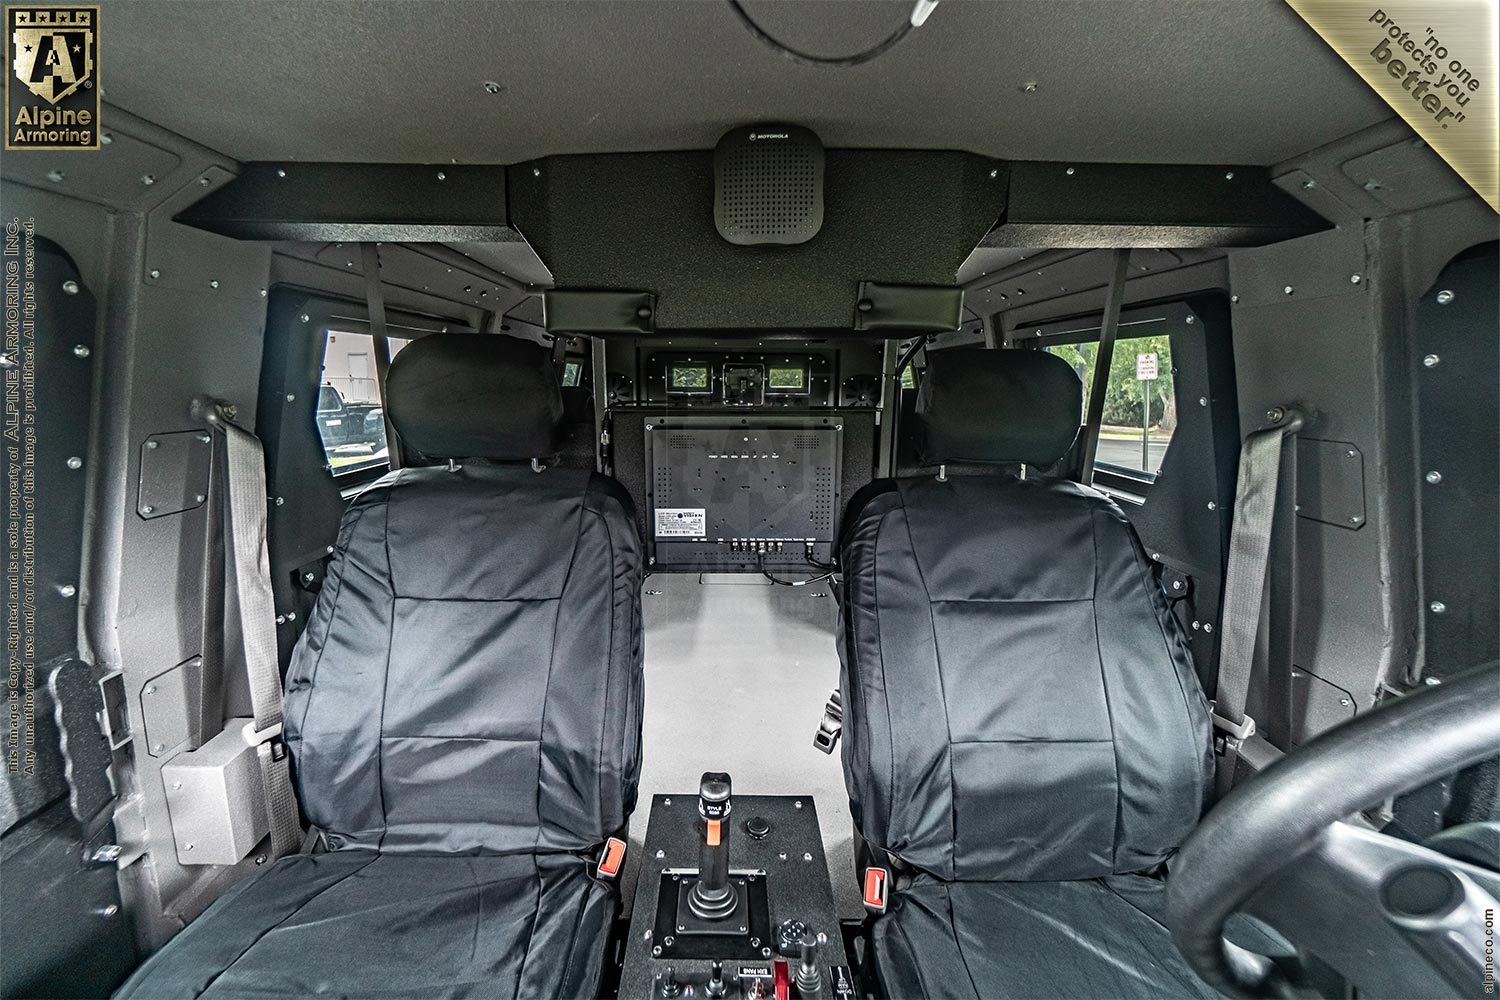 Inventory SWAT Truck Pit-Bull X Exterior Interior Images